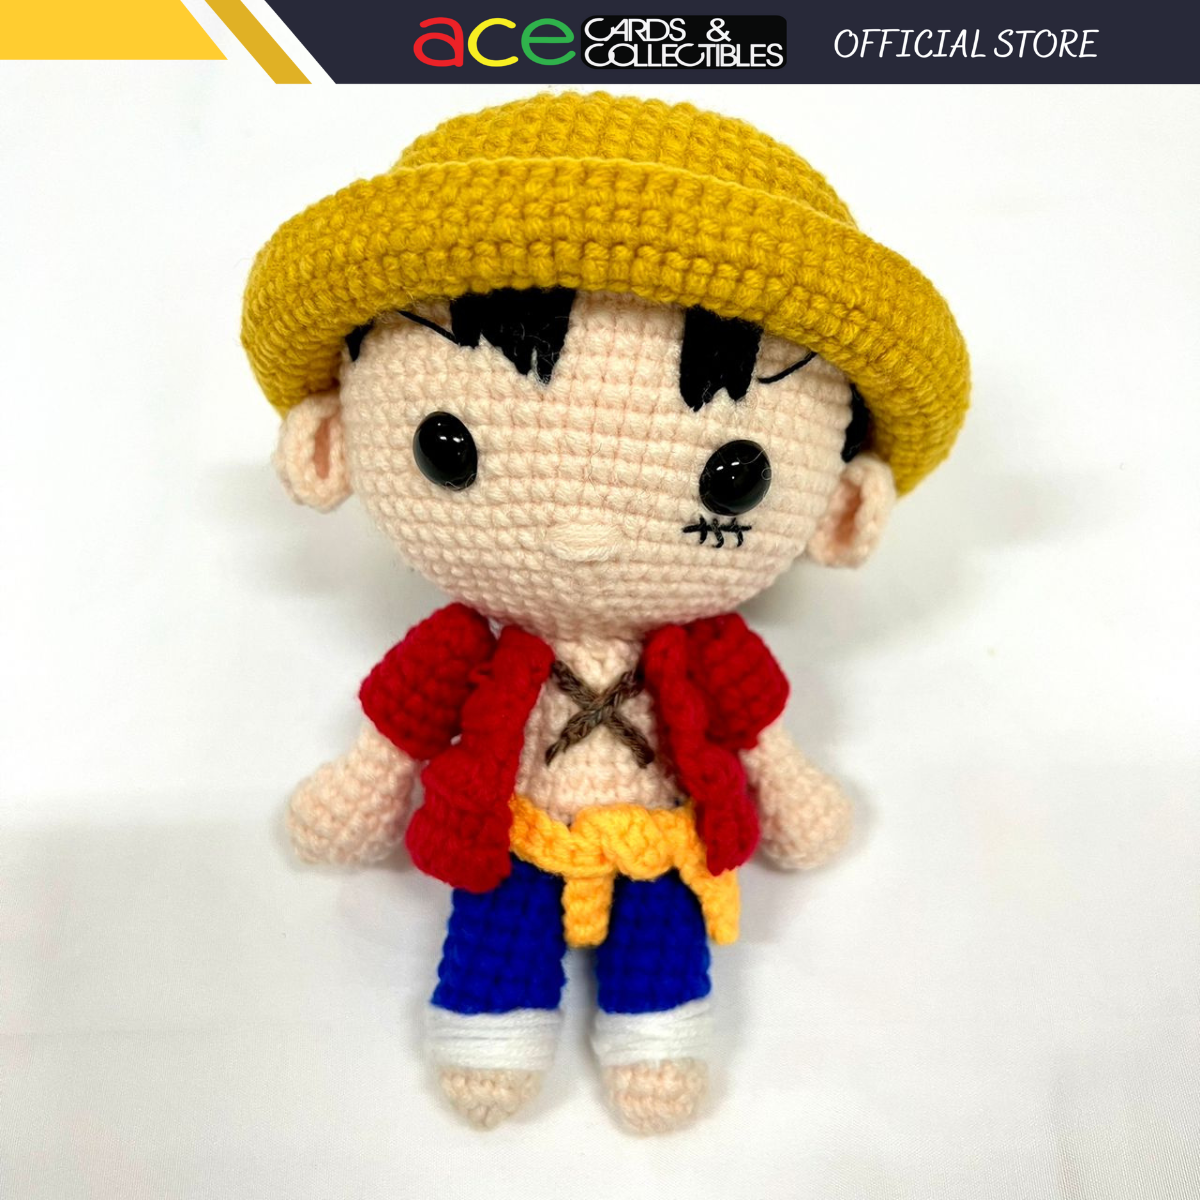 Fan Made One Piece Plush "Luffy"-Fan Made-Ace Cards & Collectibles